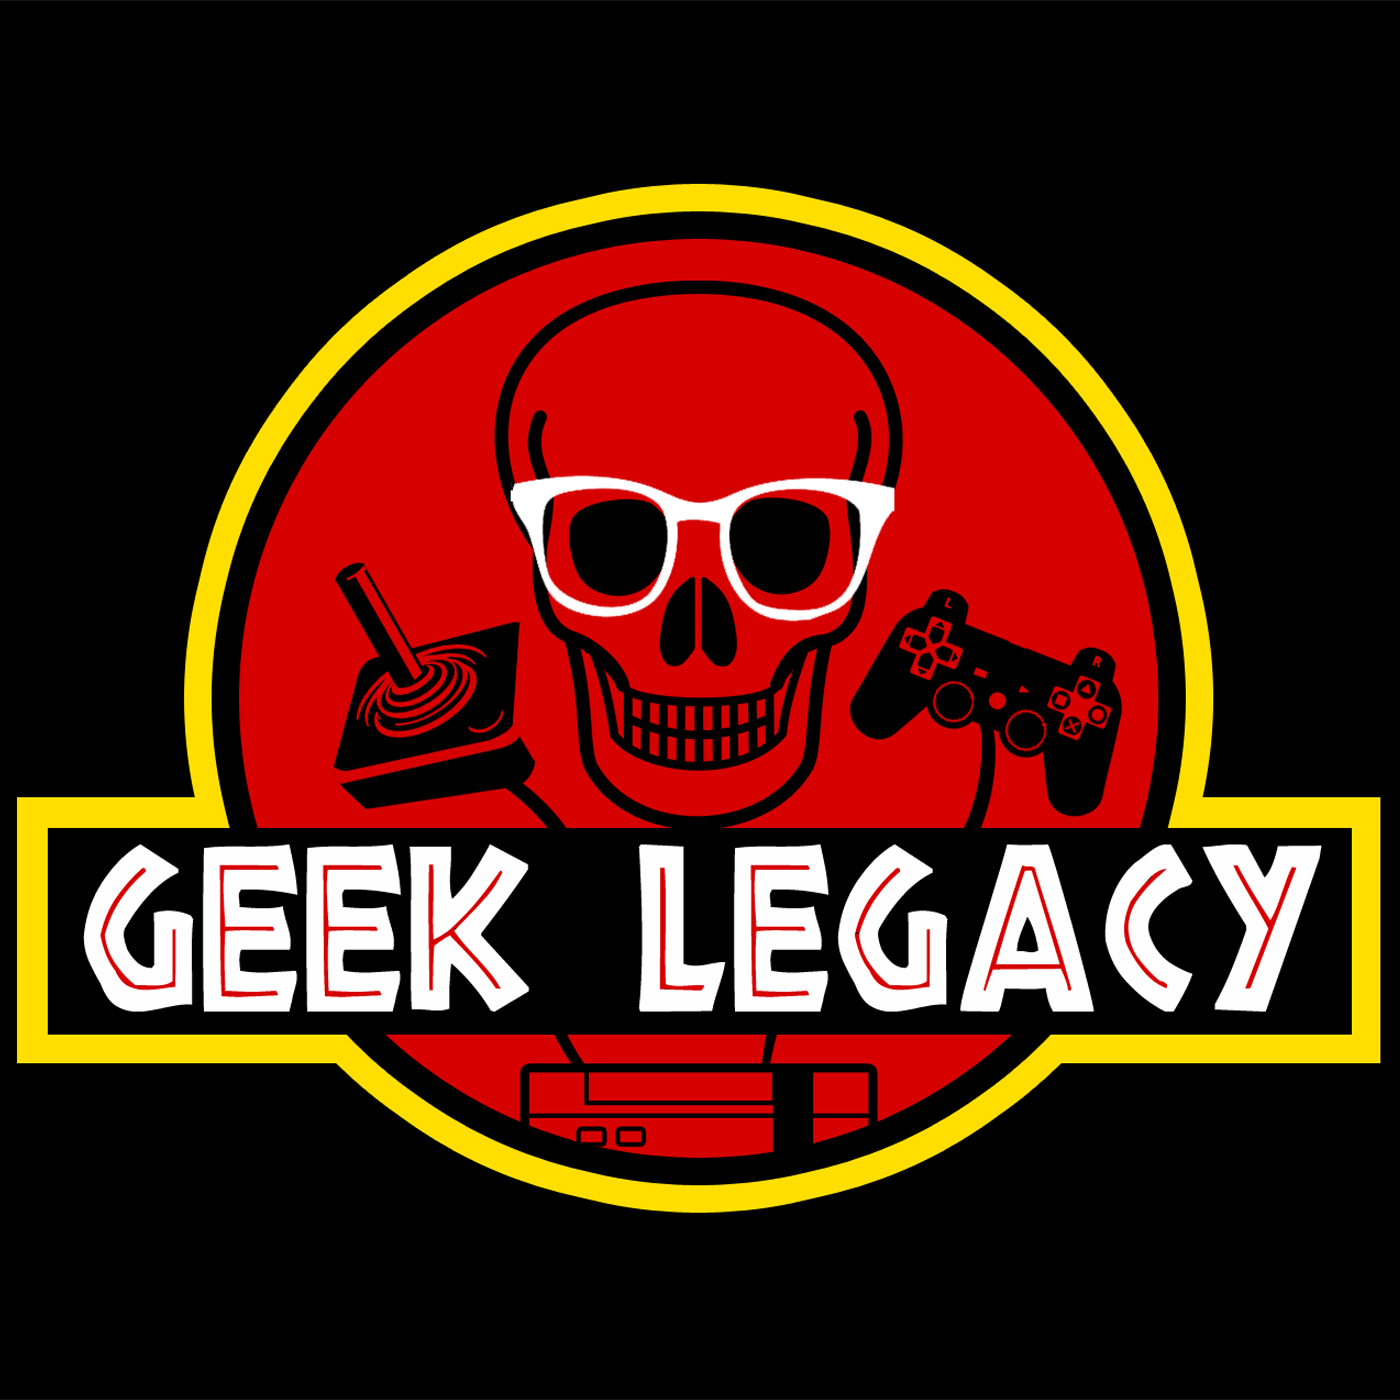 Geek Legacy Podcast: Episode 208 - What's Next for Star Wars?